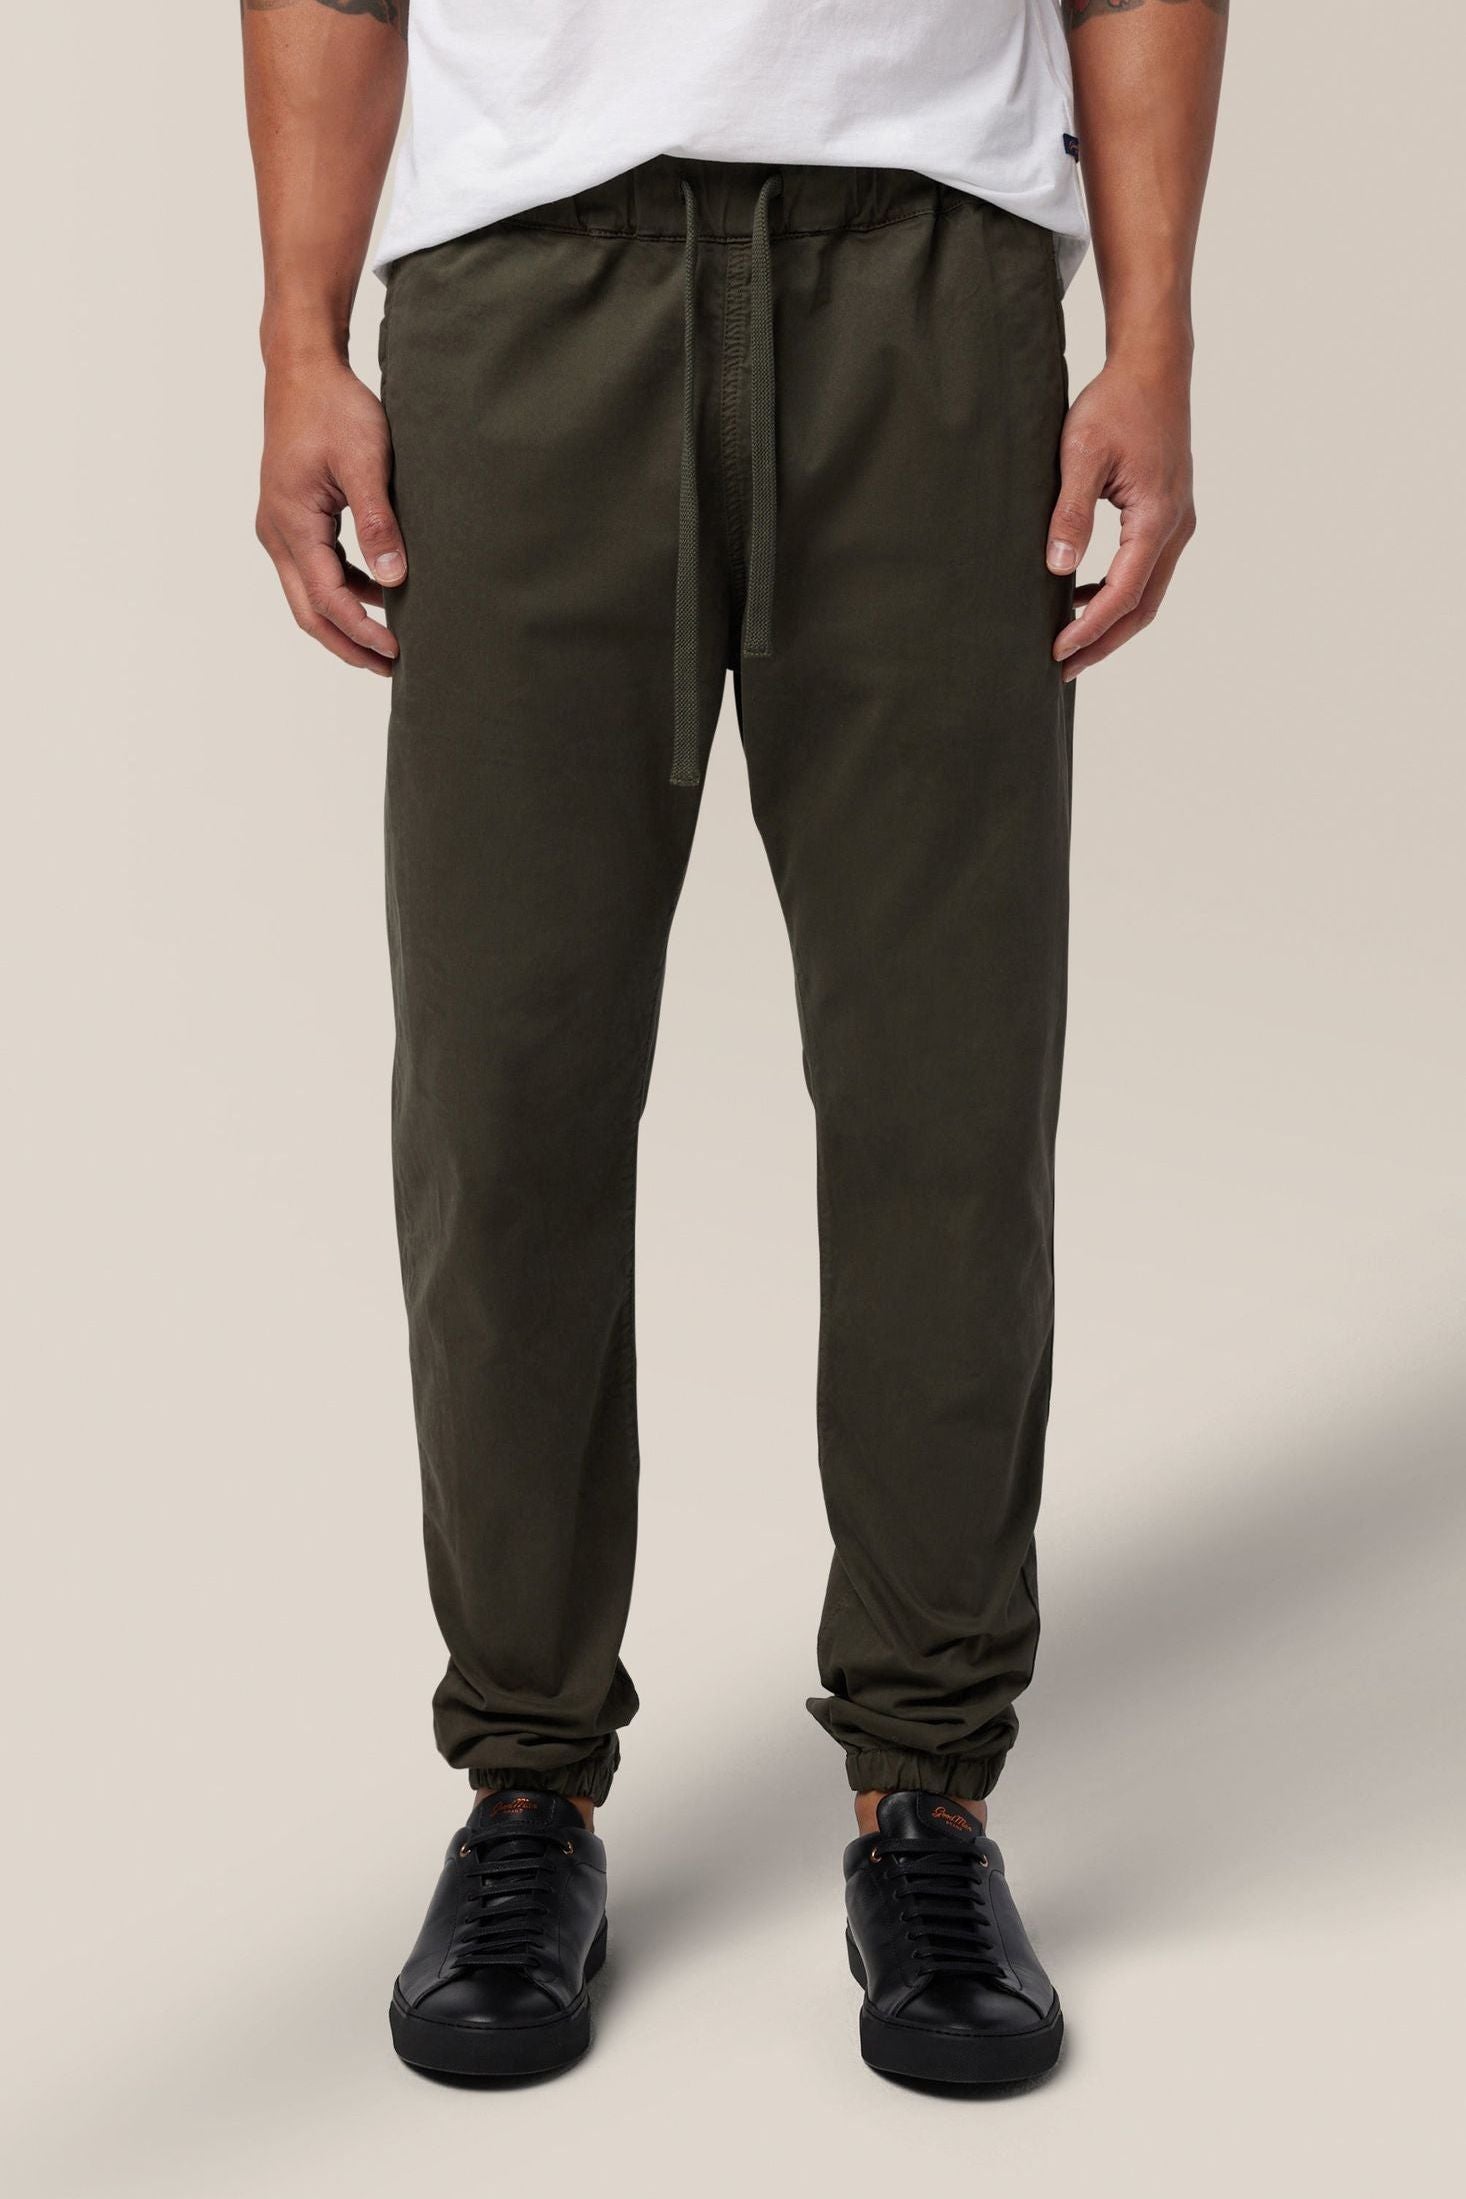 The House of LR&C | Good Man Brand | Monaco Zoom Jogger in Cotton Twill